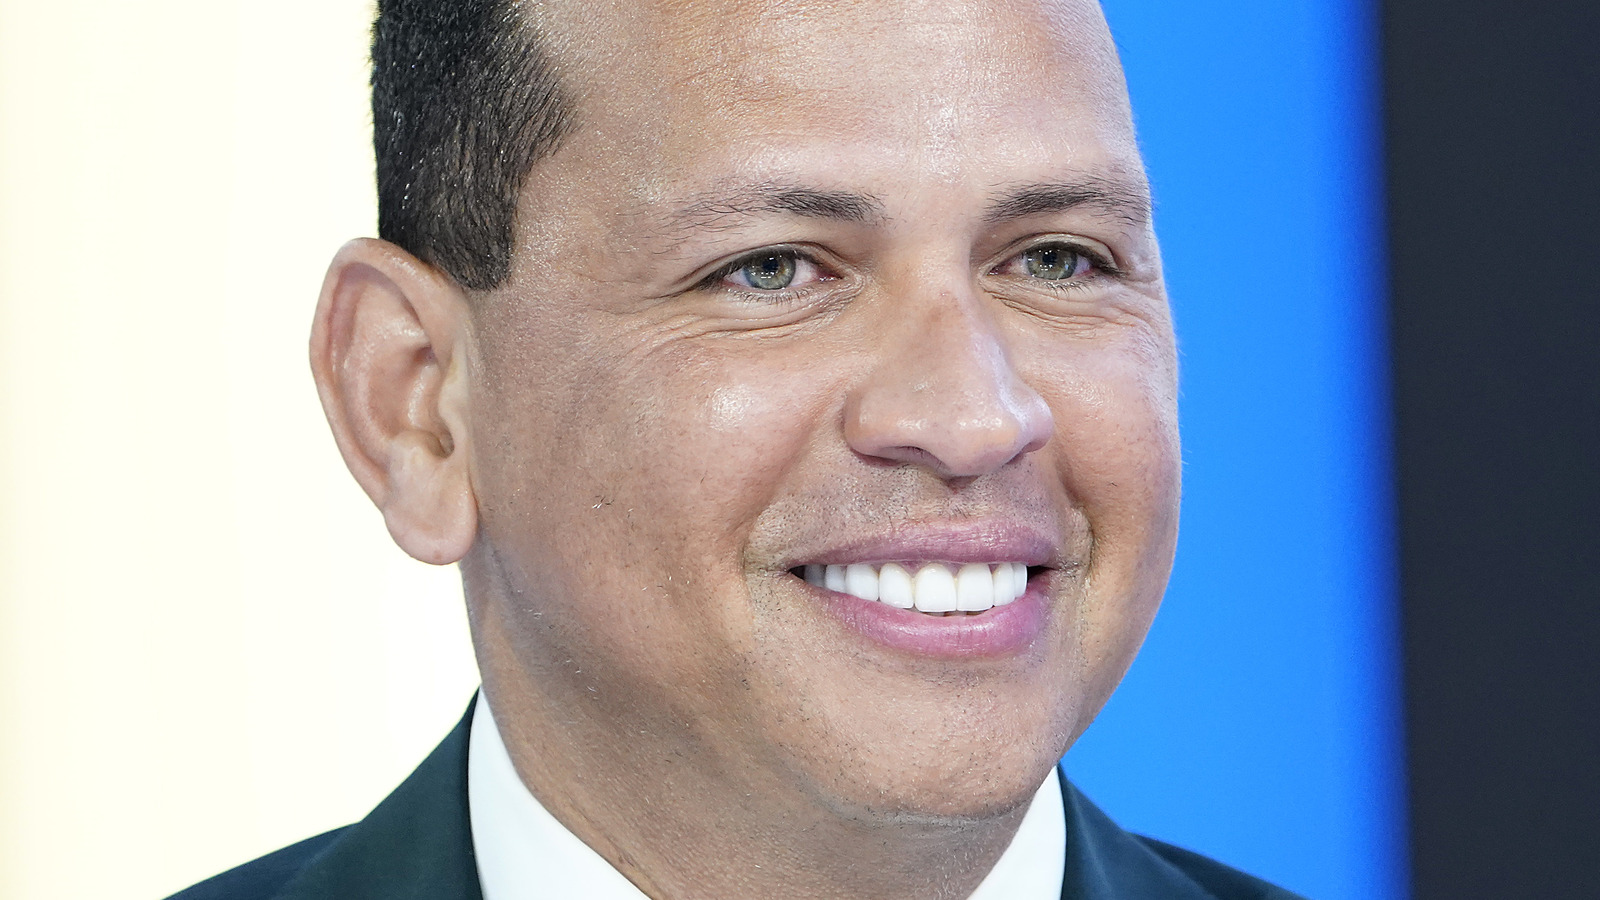 A-Rod's Ex's Mom: He Was Nice But Not 'Intellectual